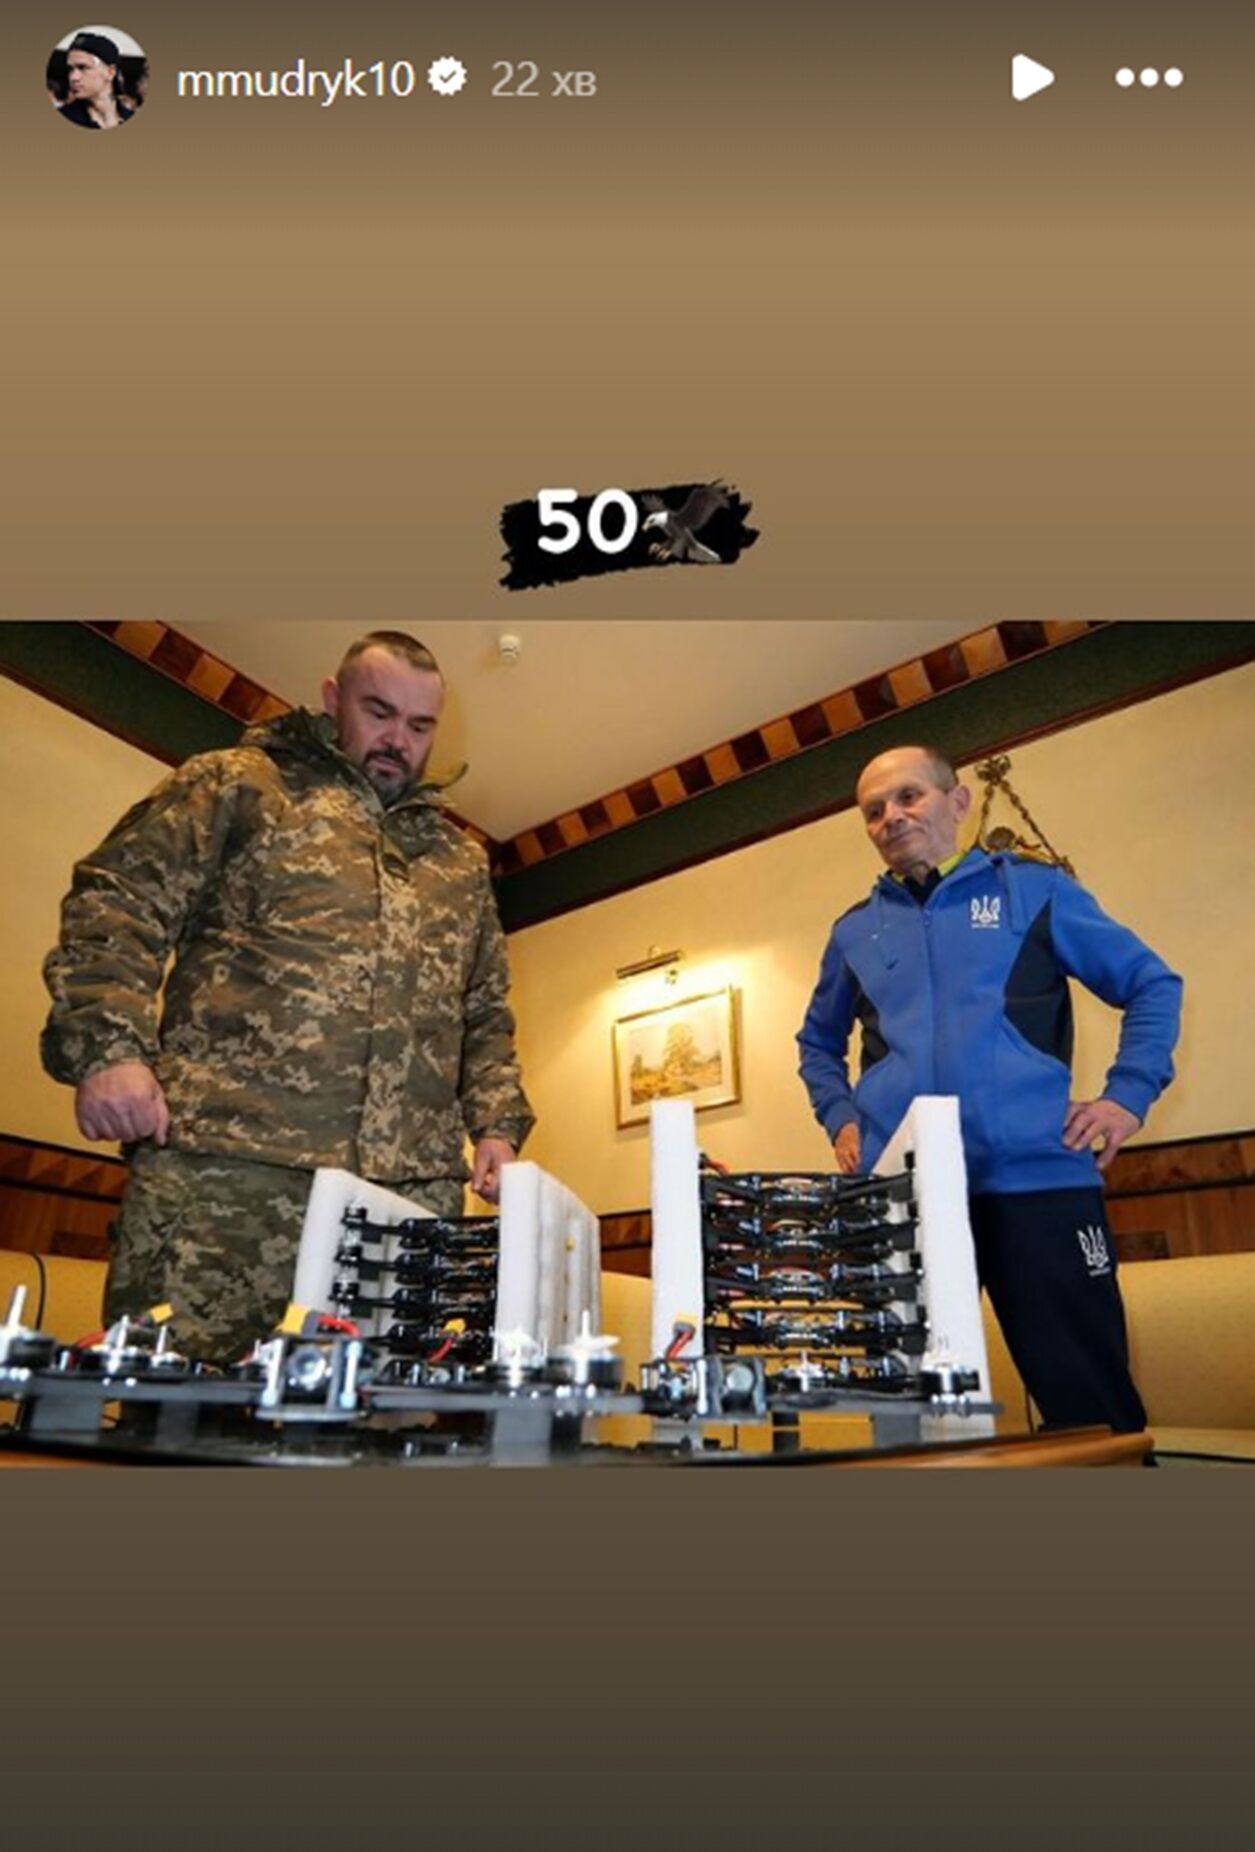 Mudryk hands over 50 FPV drones to the Armed Forces of Ukraine